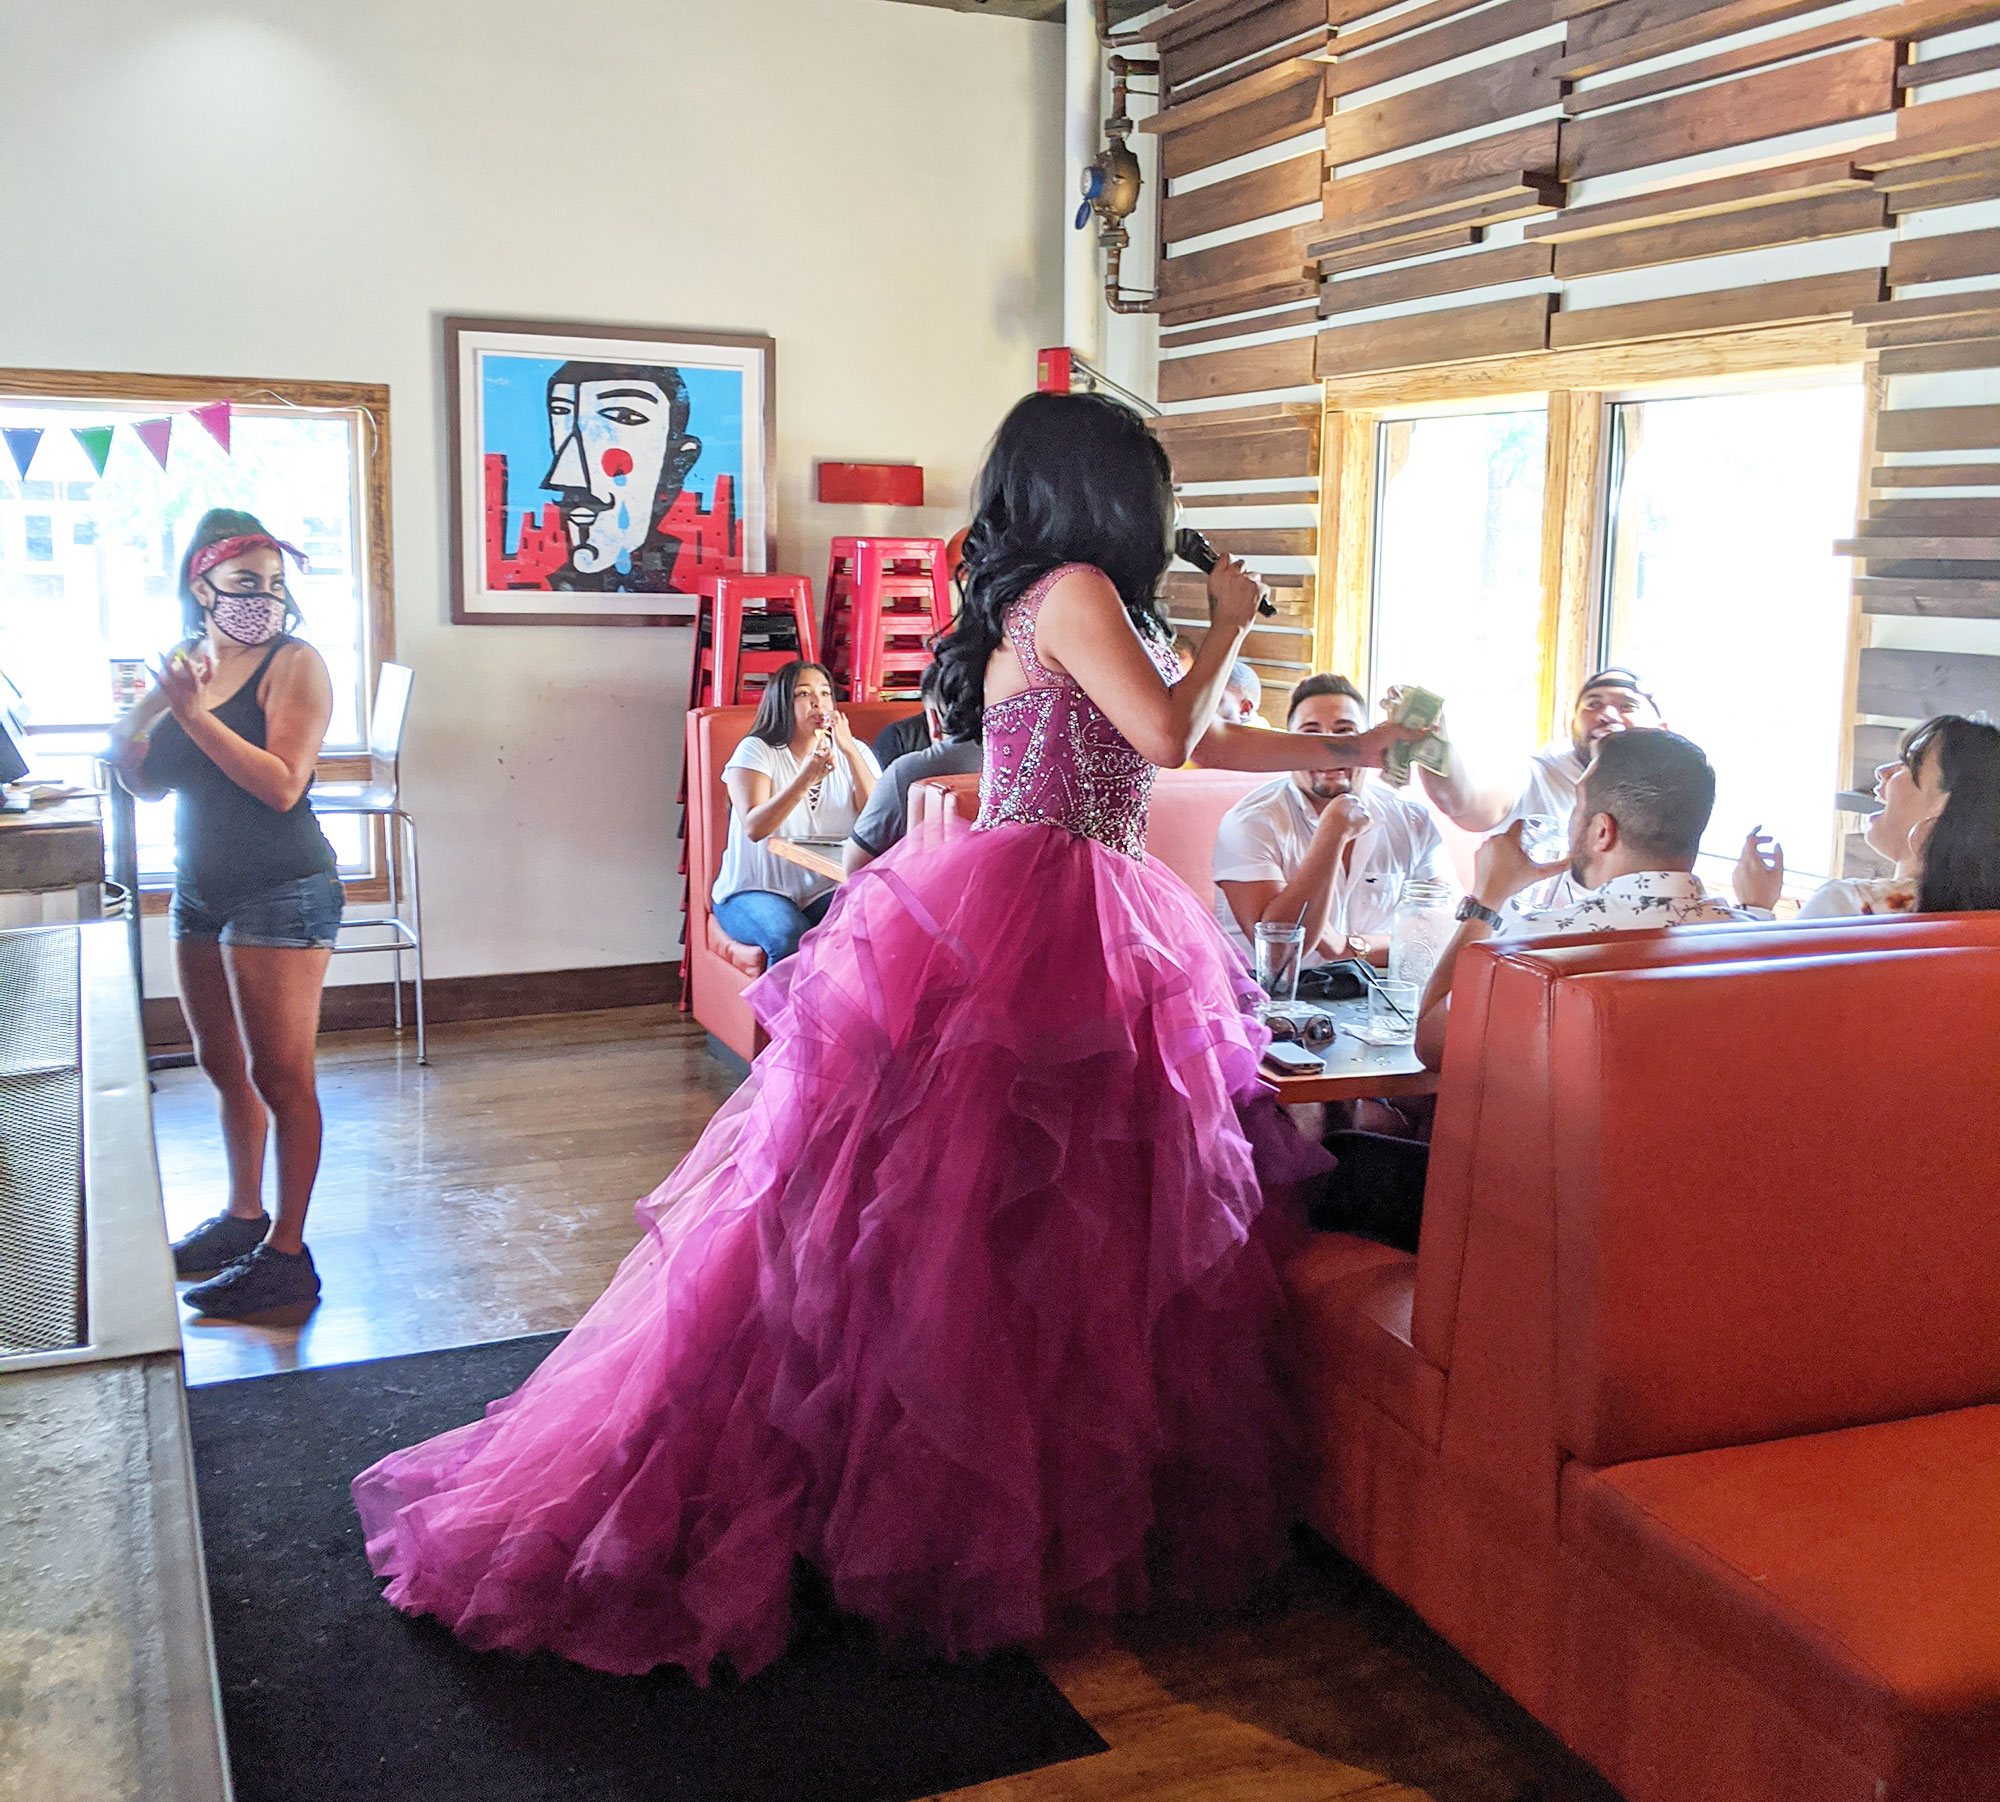 Mayra D'Lorenzo performing at TNT Drag Queen Brunch in Uptown Dallas.